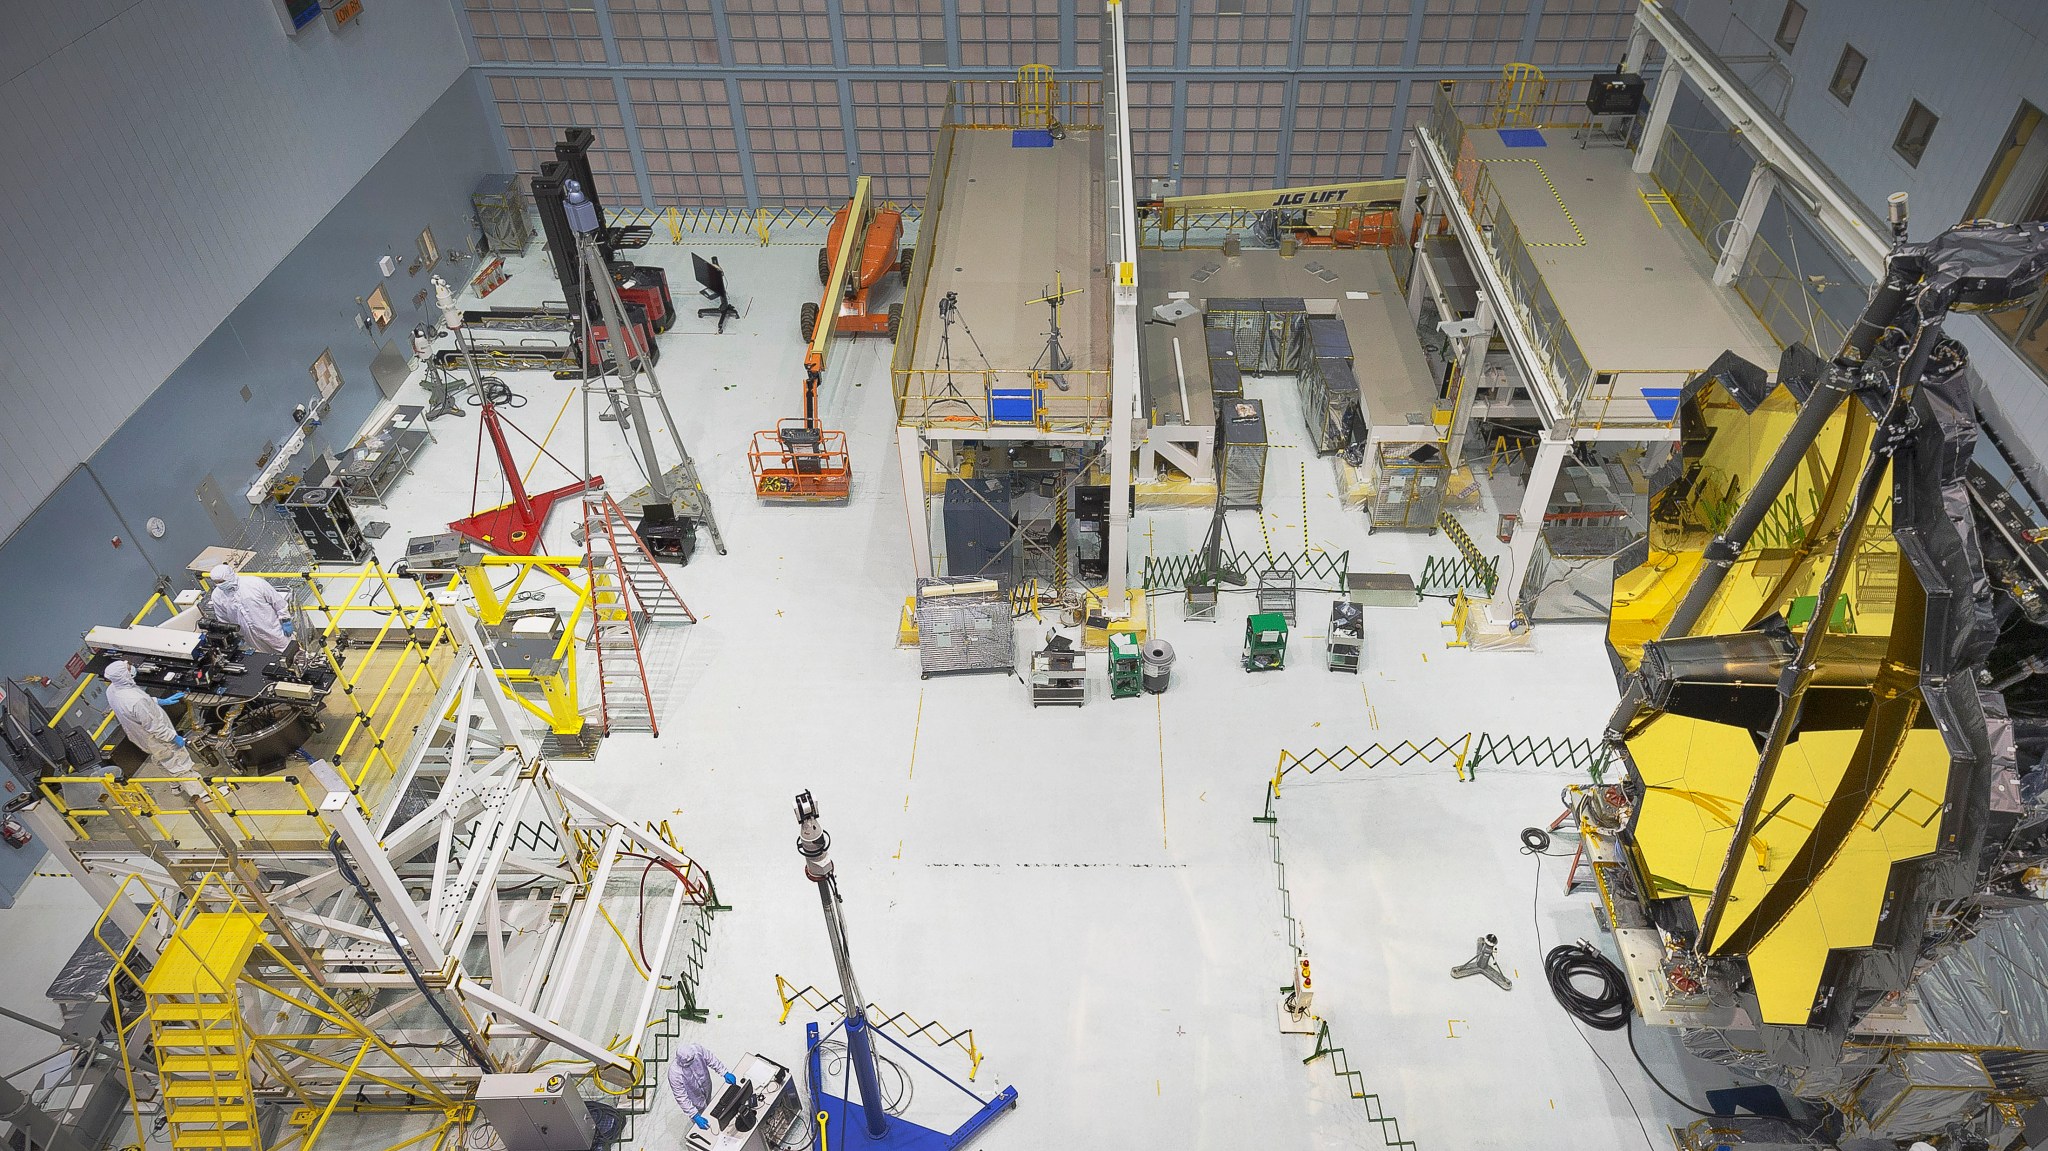 Engineers conduct a "Center of Curvature" test on NASA's James Webb Space Telescope in the clean room.